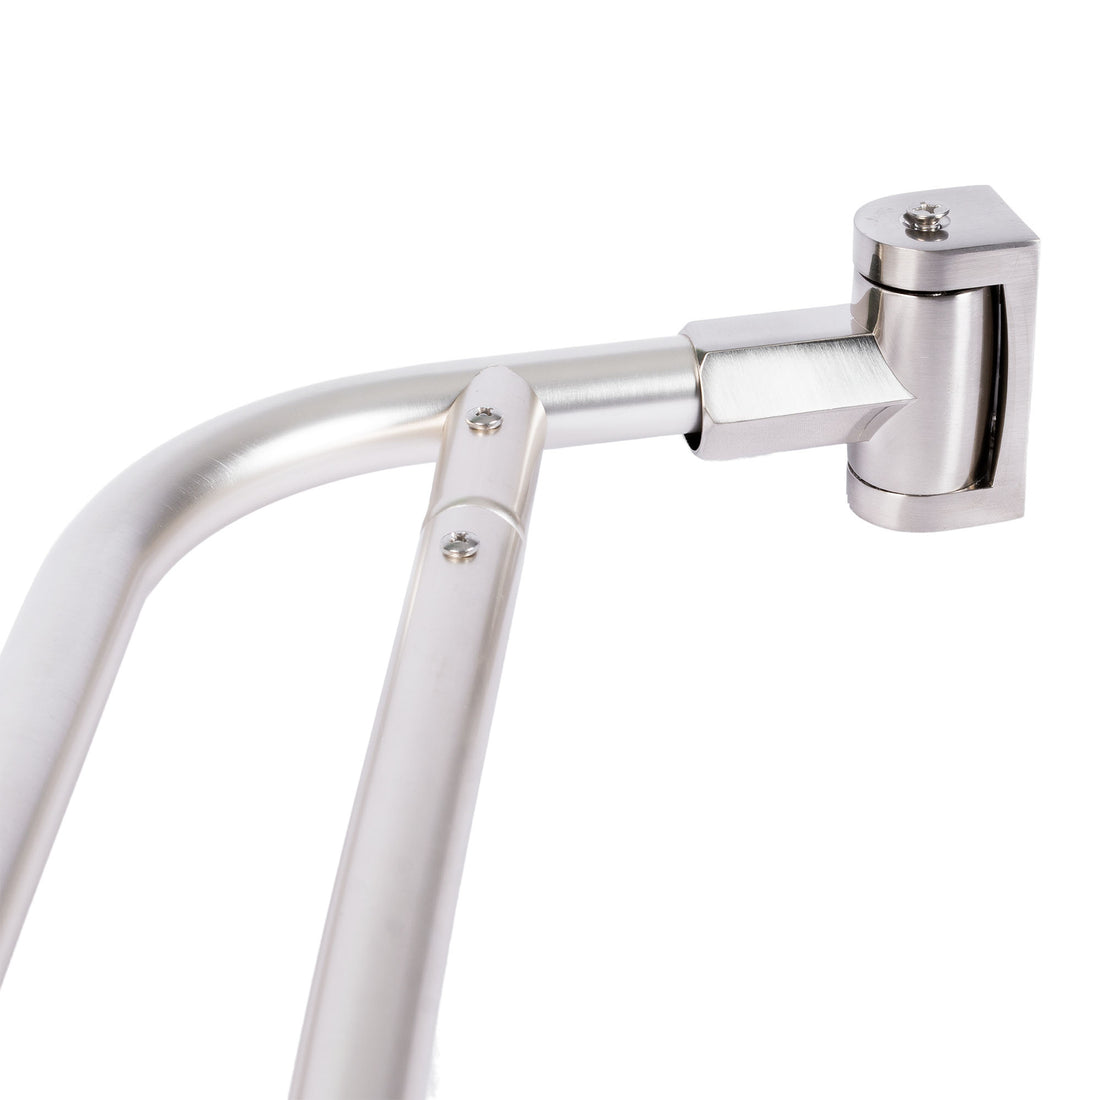 44 in. to 70 in. Double Curved Shower Rod (Brushed Nickel Finish) - Utility sinks vanites Tehila